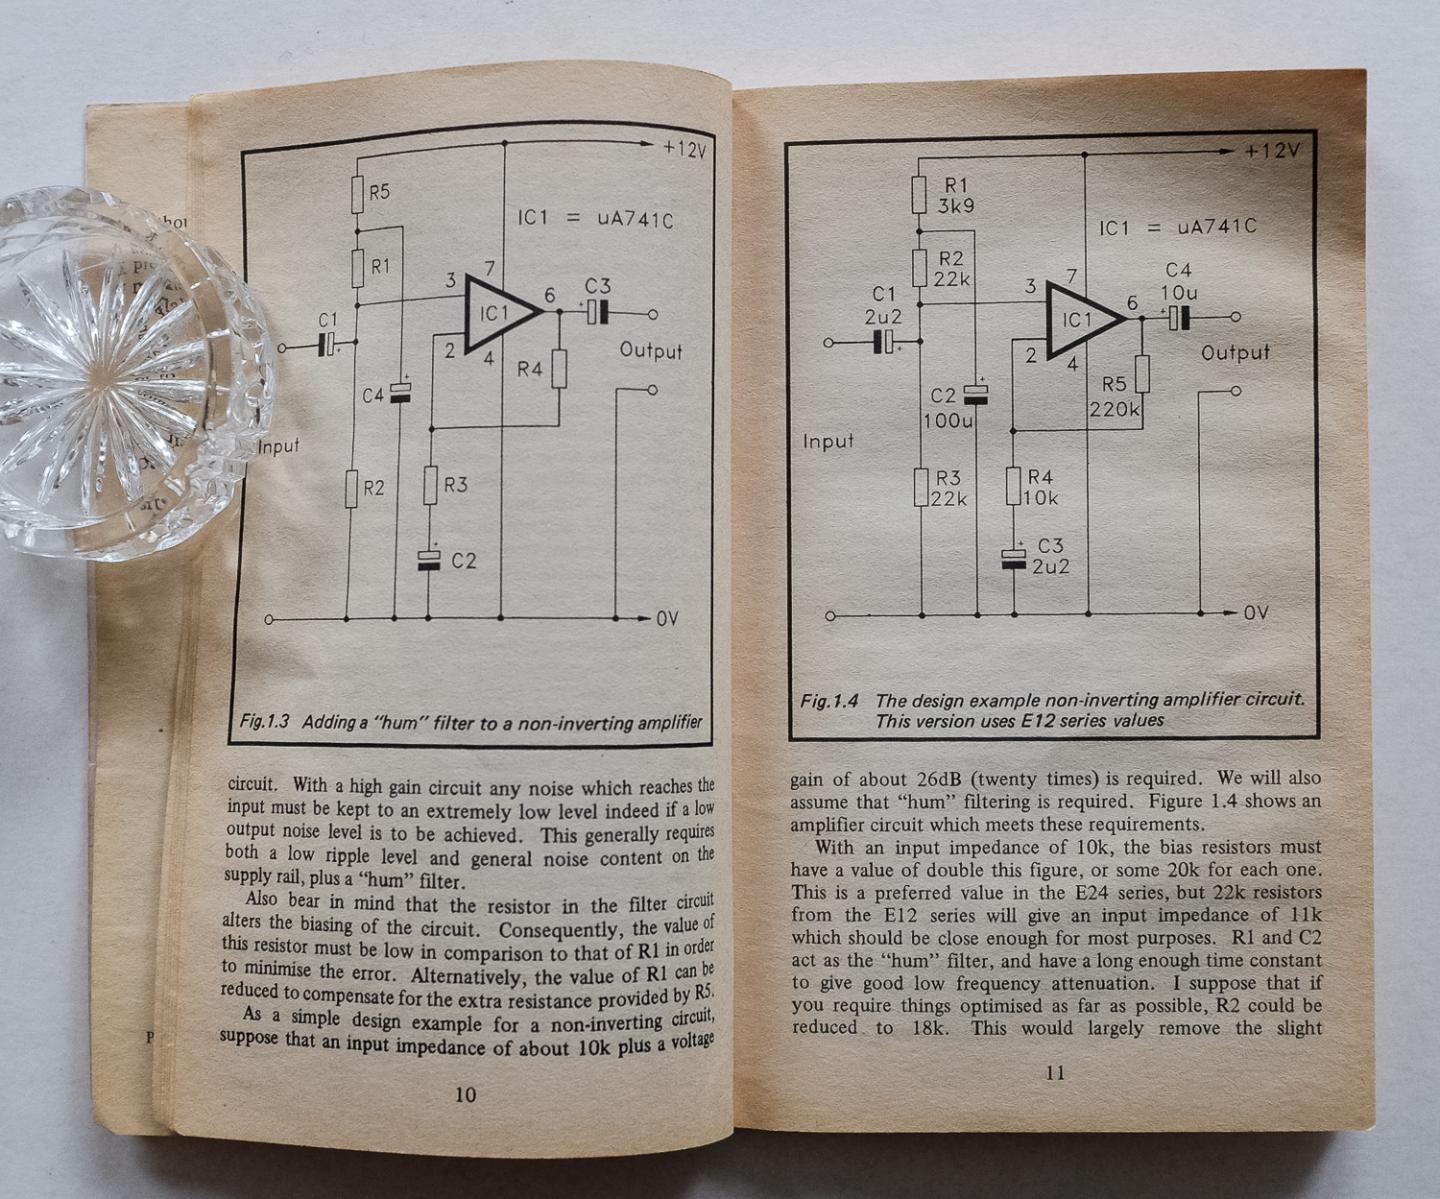 Penfold, R.A. - Preamplifier and filter circuits